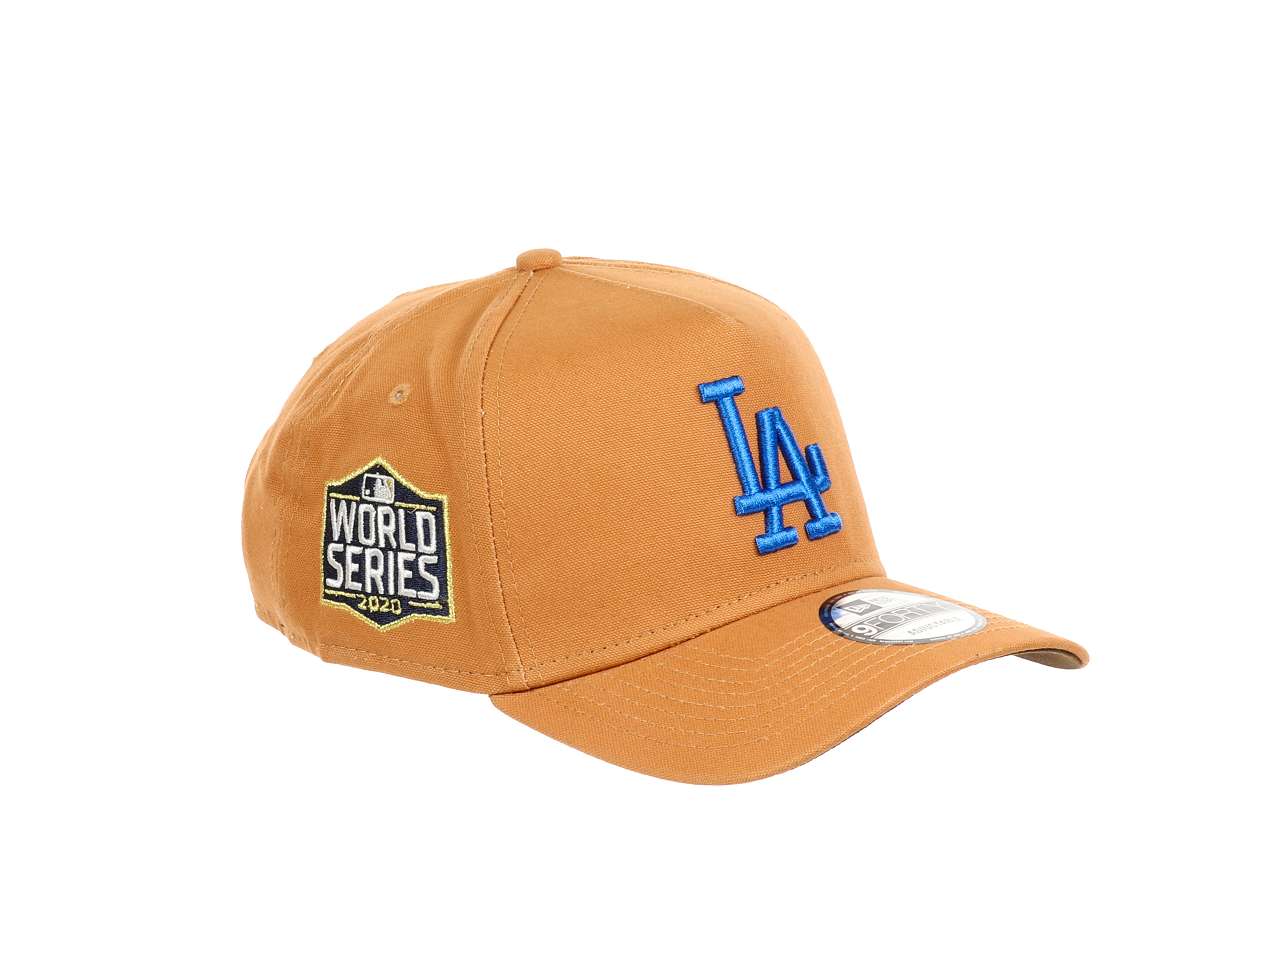 Los Angeles Dodgers MLB Bronze World Series 2020 Sidepatch 9Forty A-Frame Adjustable Cap New Era